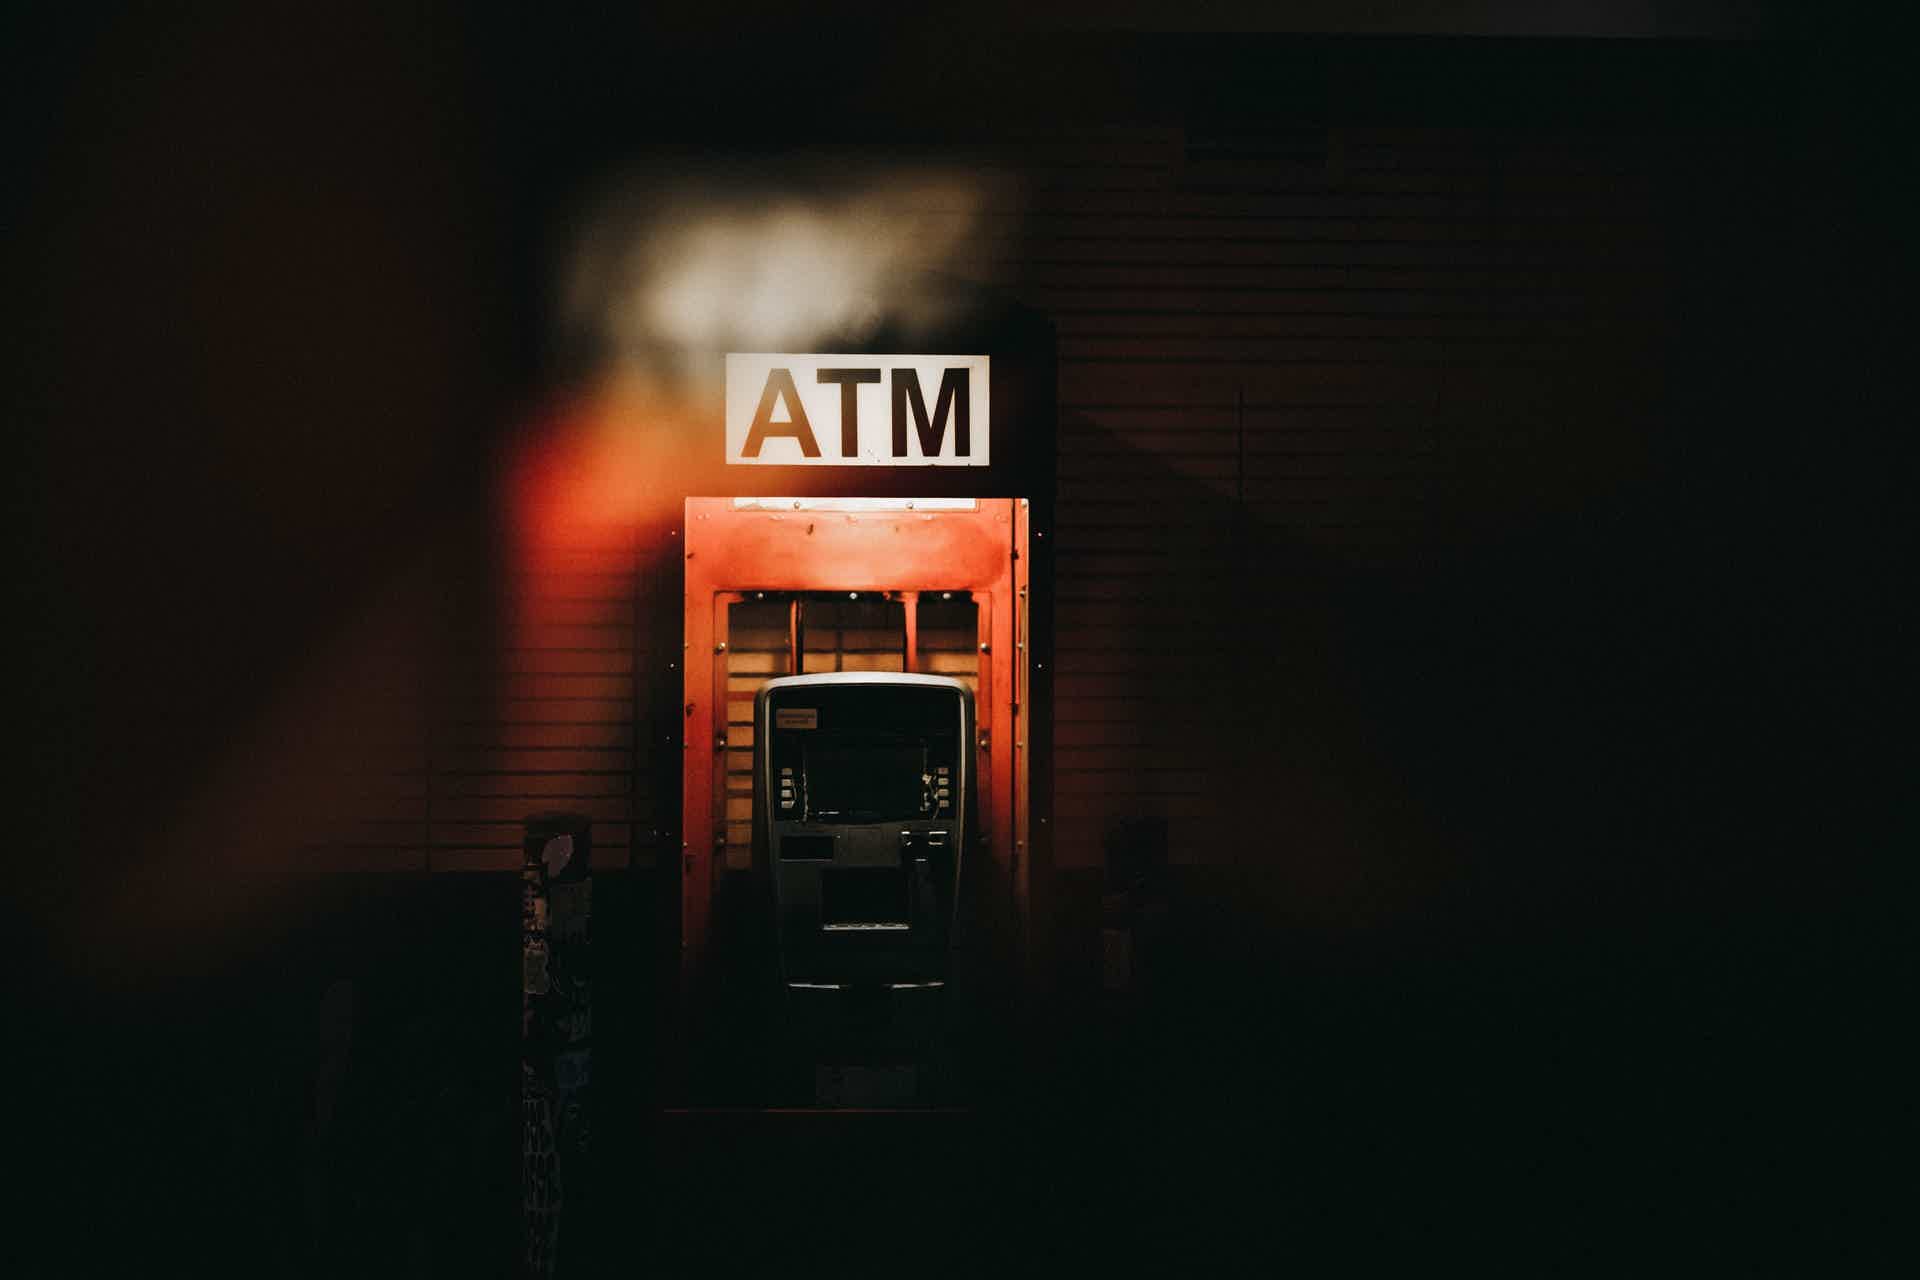 Learn more about the costs of this Bitcoin ATM! Source: Unsplash